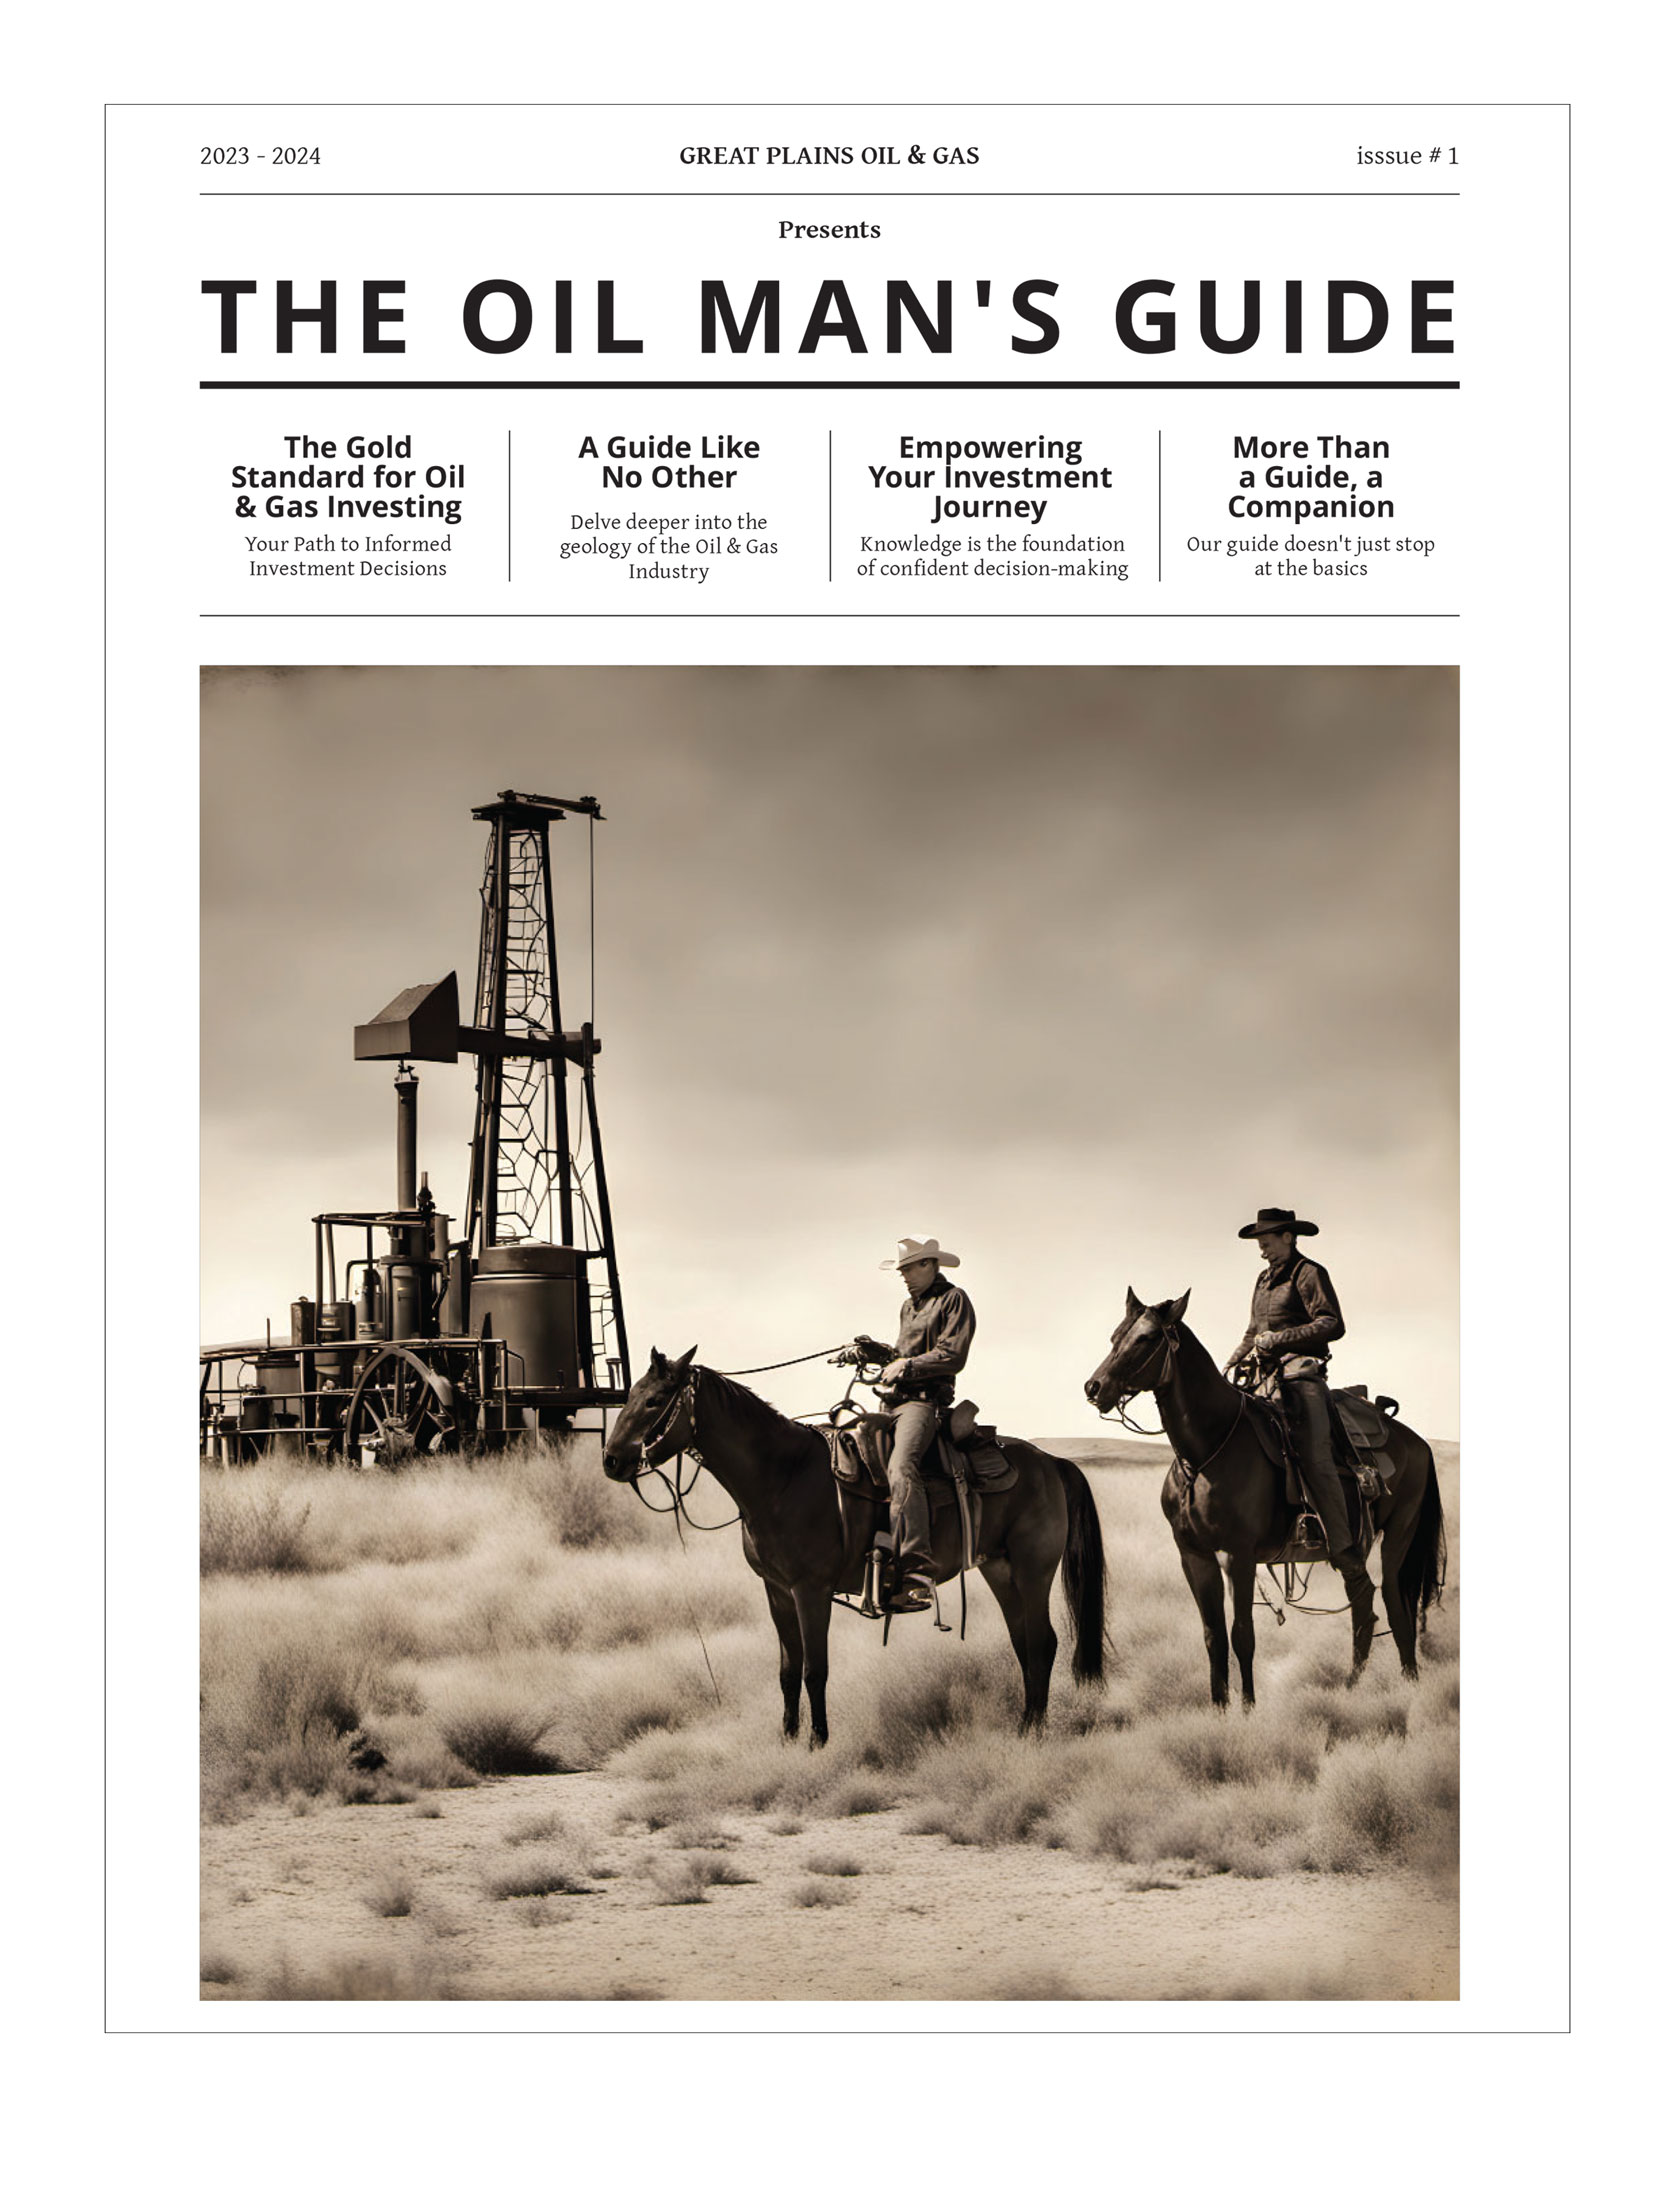 The Free Oil Man's Guide to Investing